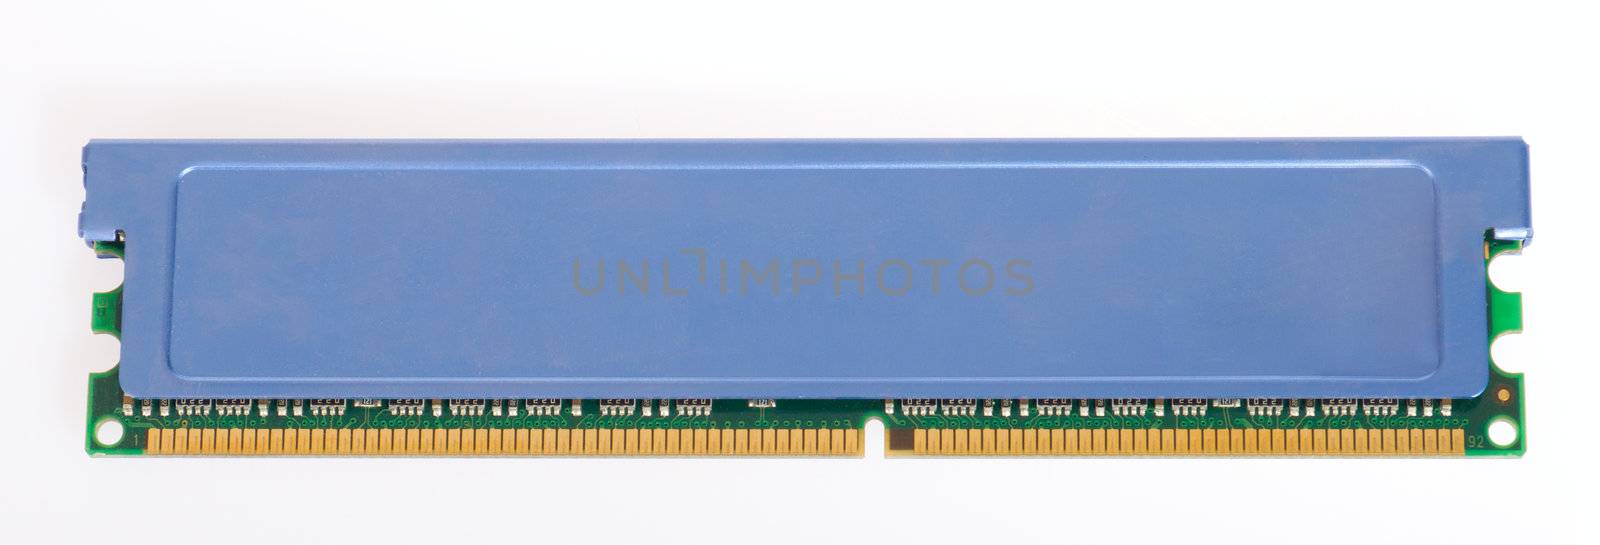 DDR memory module stick, photo on the white background